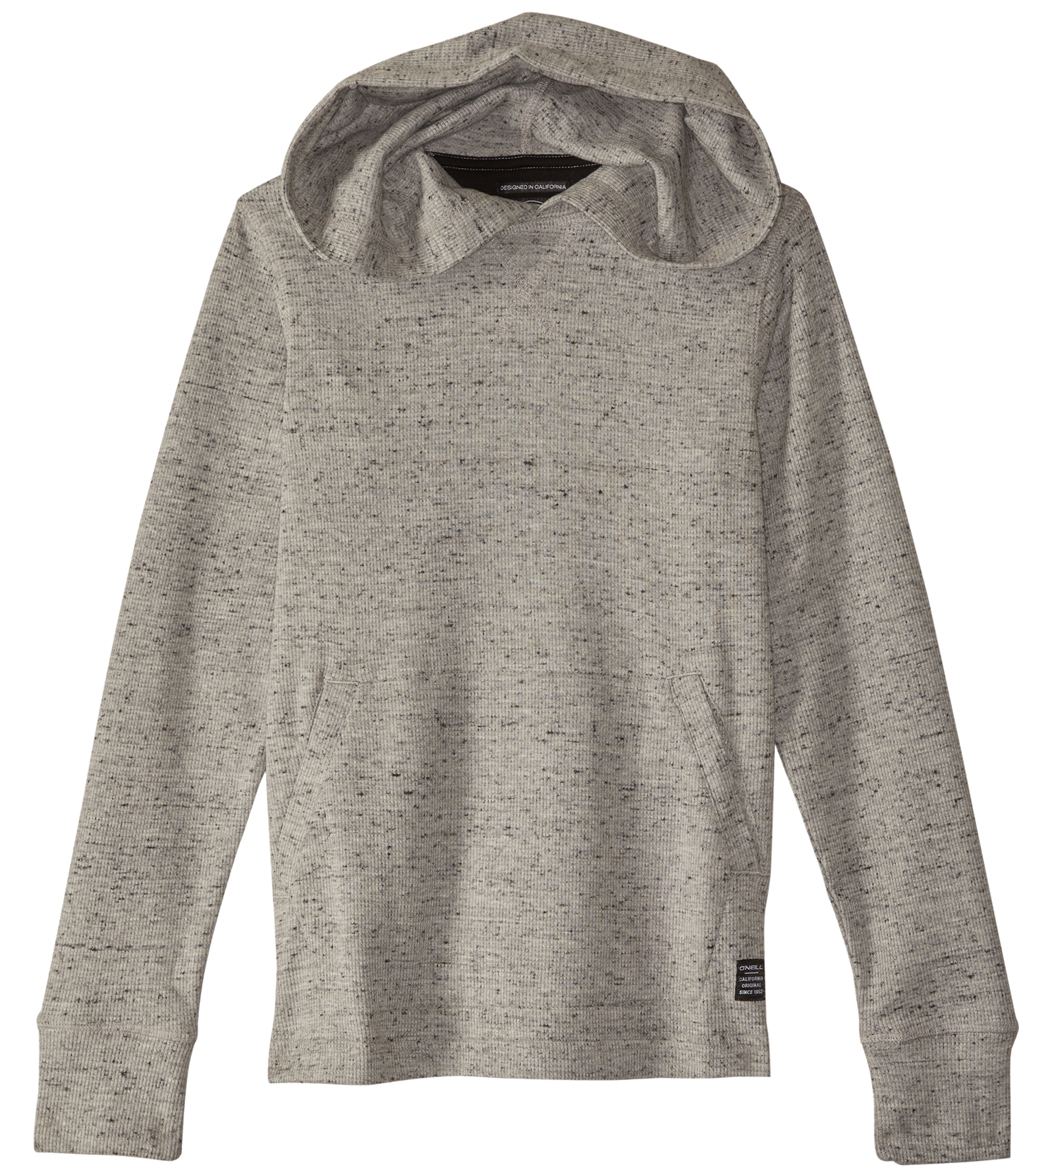 O'neill Boys' Boldin Hooded Pullover Toddler - Light Grey 2T Cotton/Polyester - Swimoutlet.com